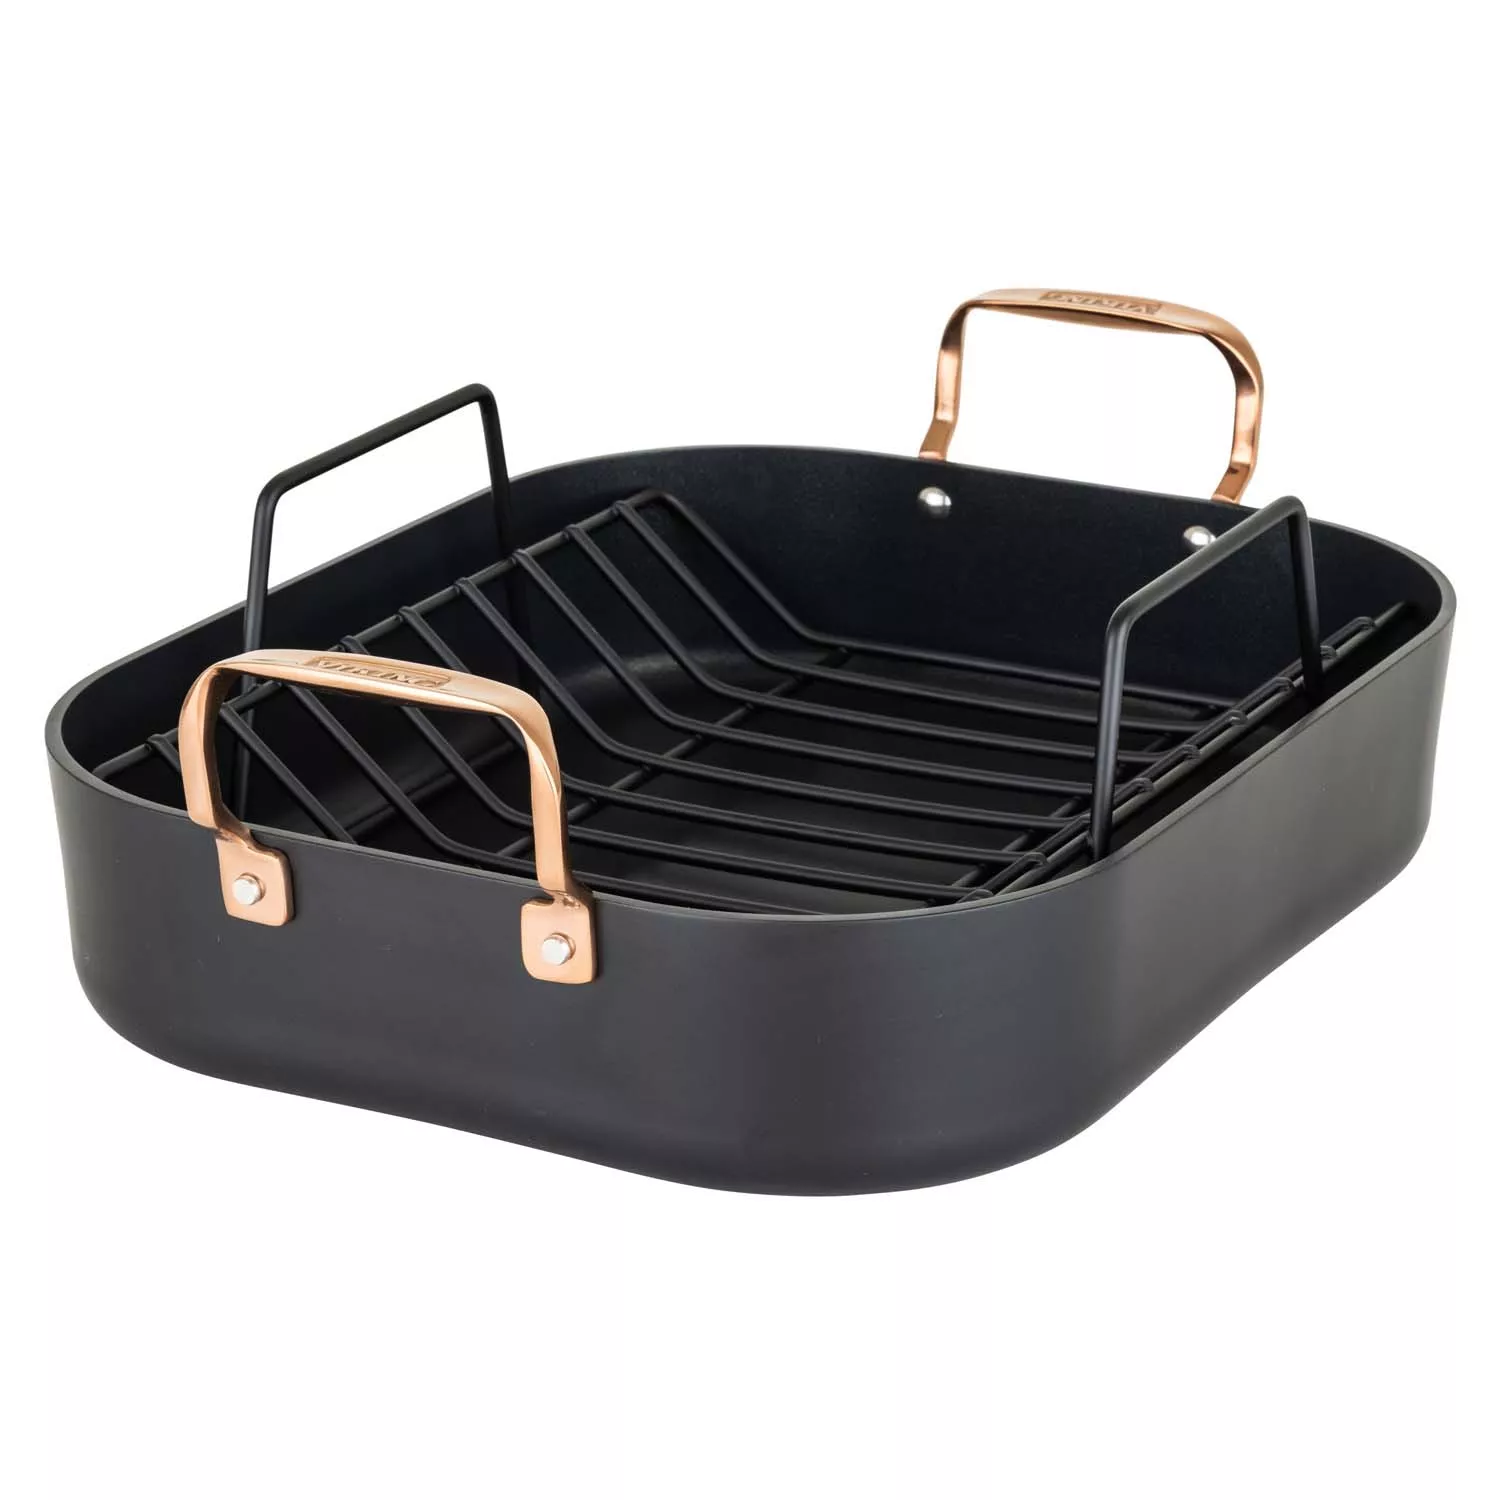 Nordic Ware Extra Large Copper Turkey Roaster with Rack